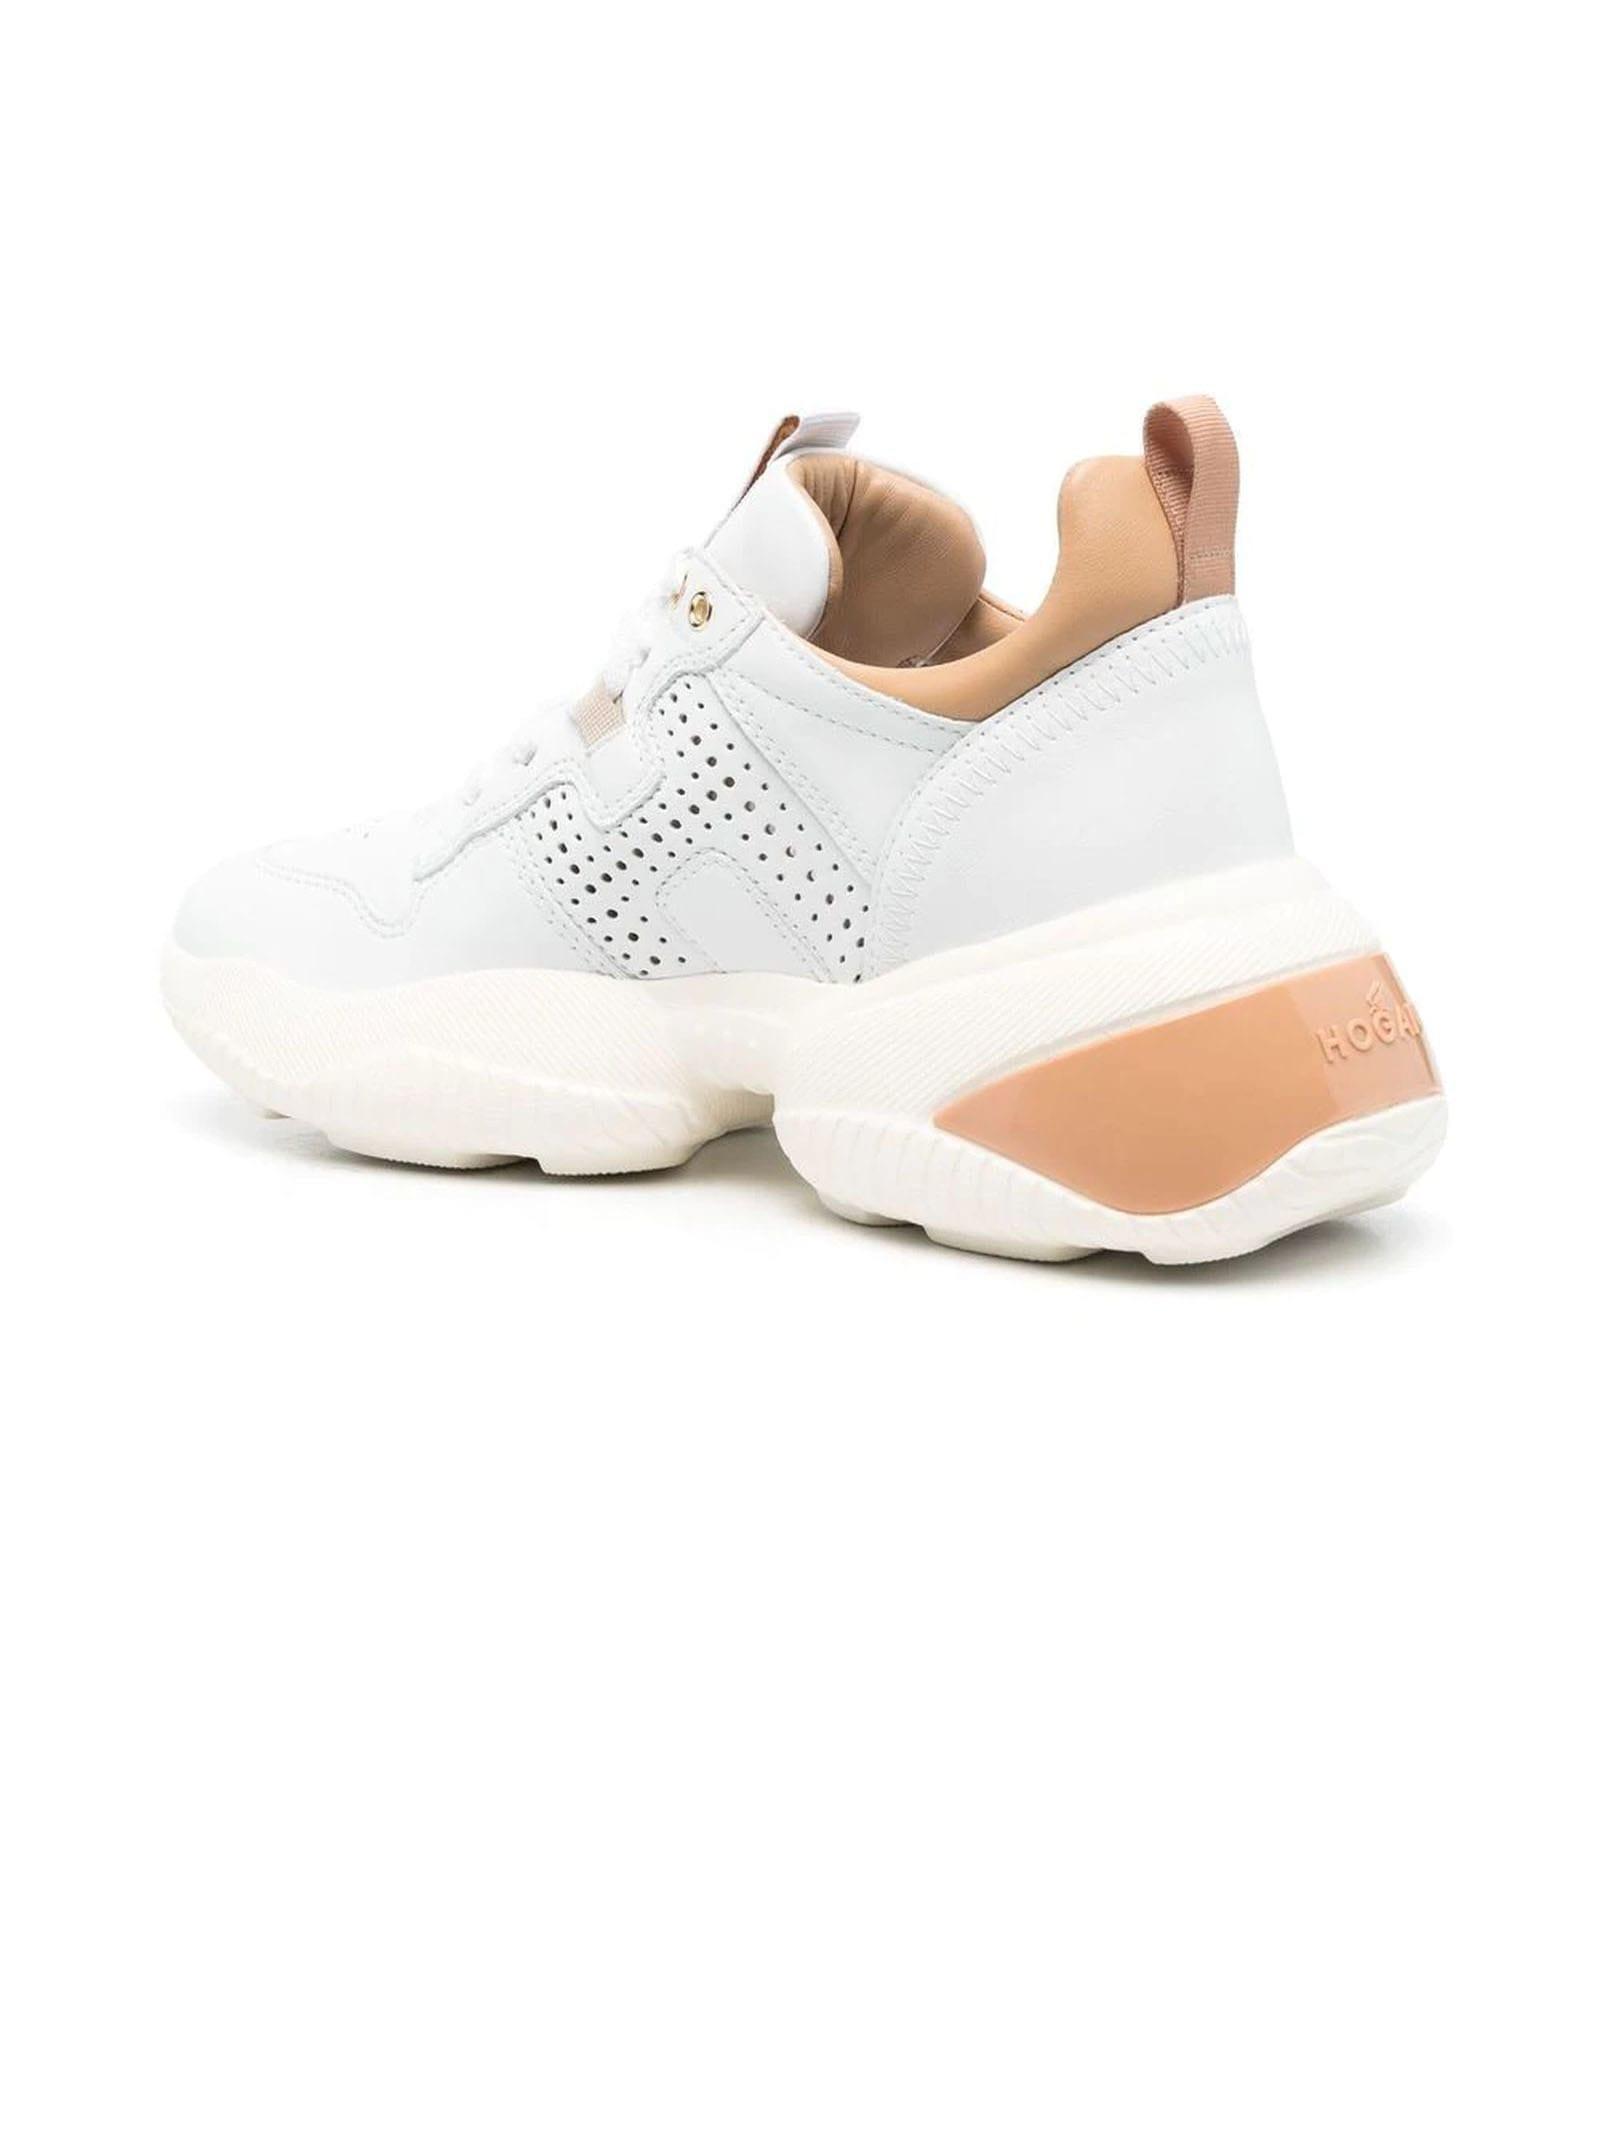 Hogan White, Grey And Beige Interaction Sneakers | Lyst